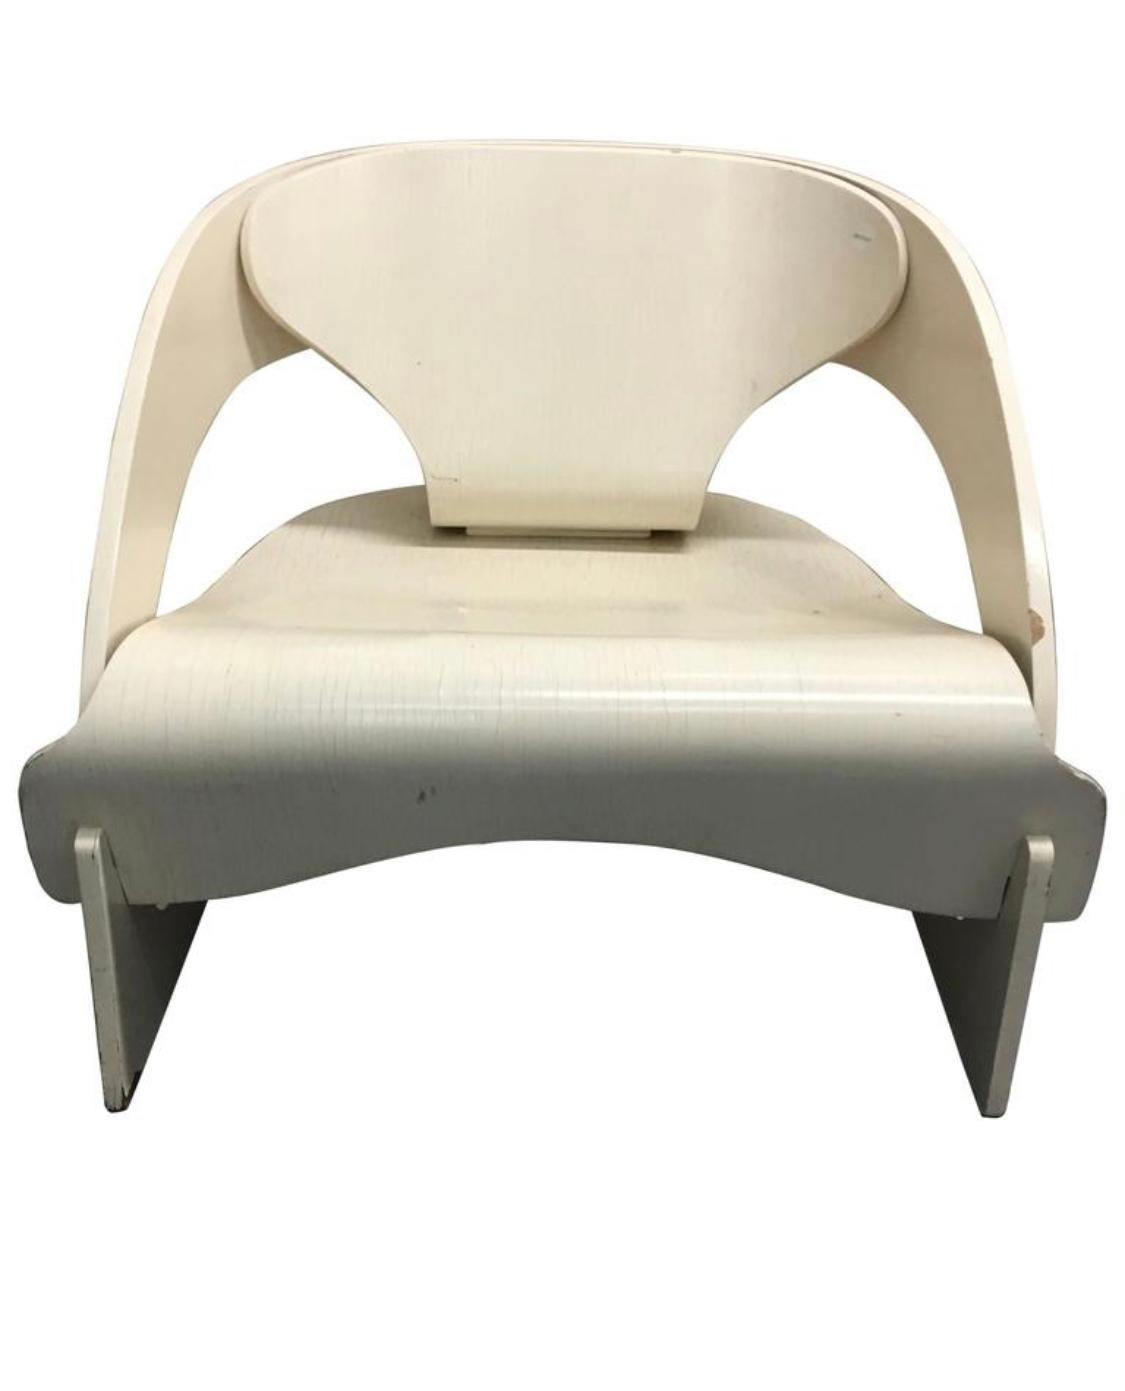 Joe Colombo for Kartell 4801 Lounge Chair. From original owner. A rare collector’s piece in apparent original condition. Some wear and described).